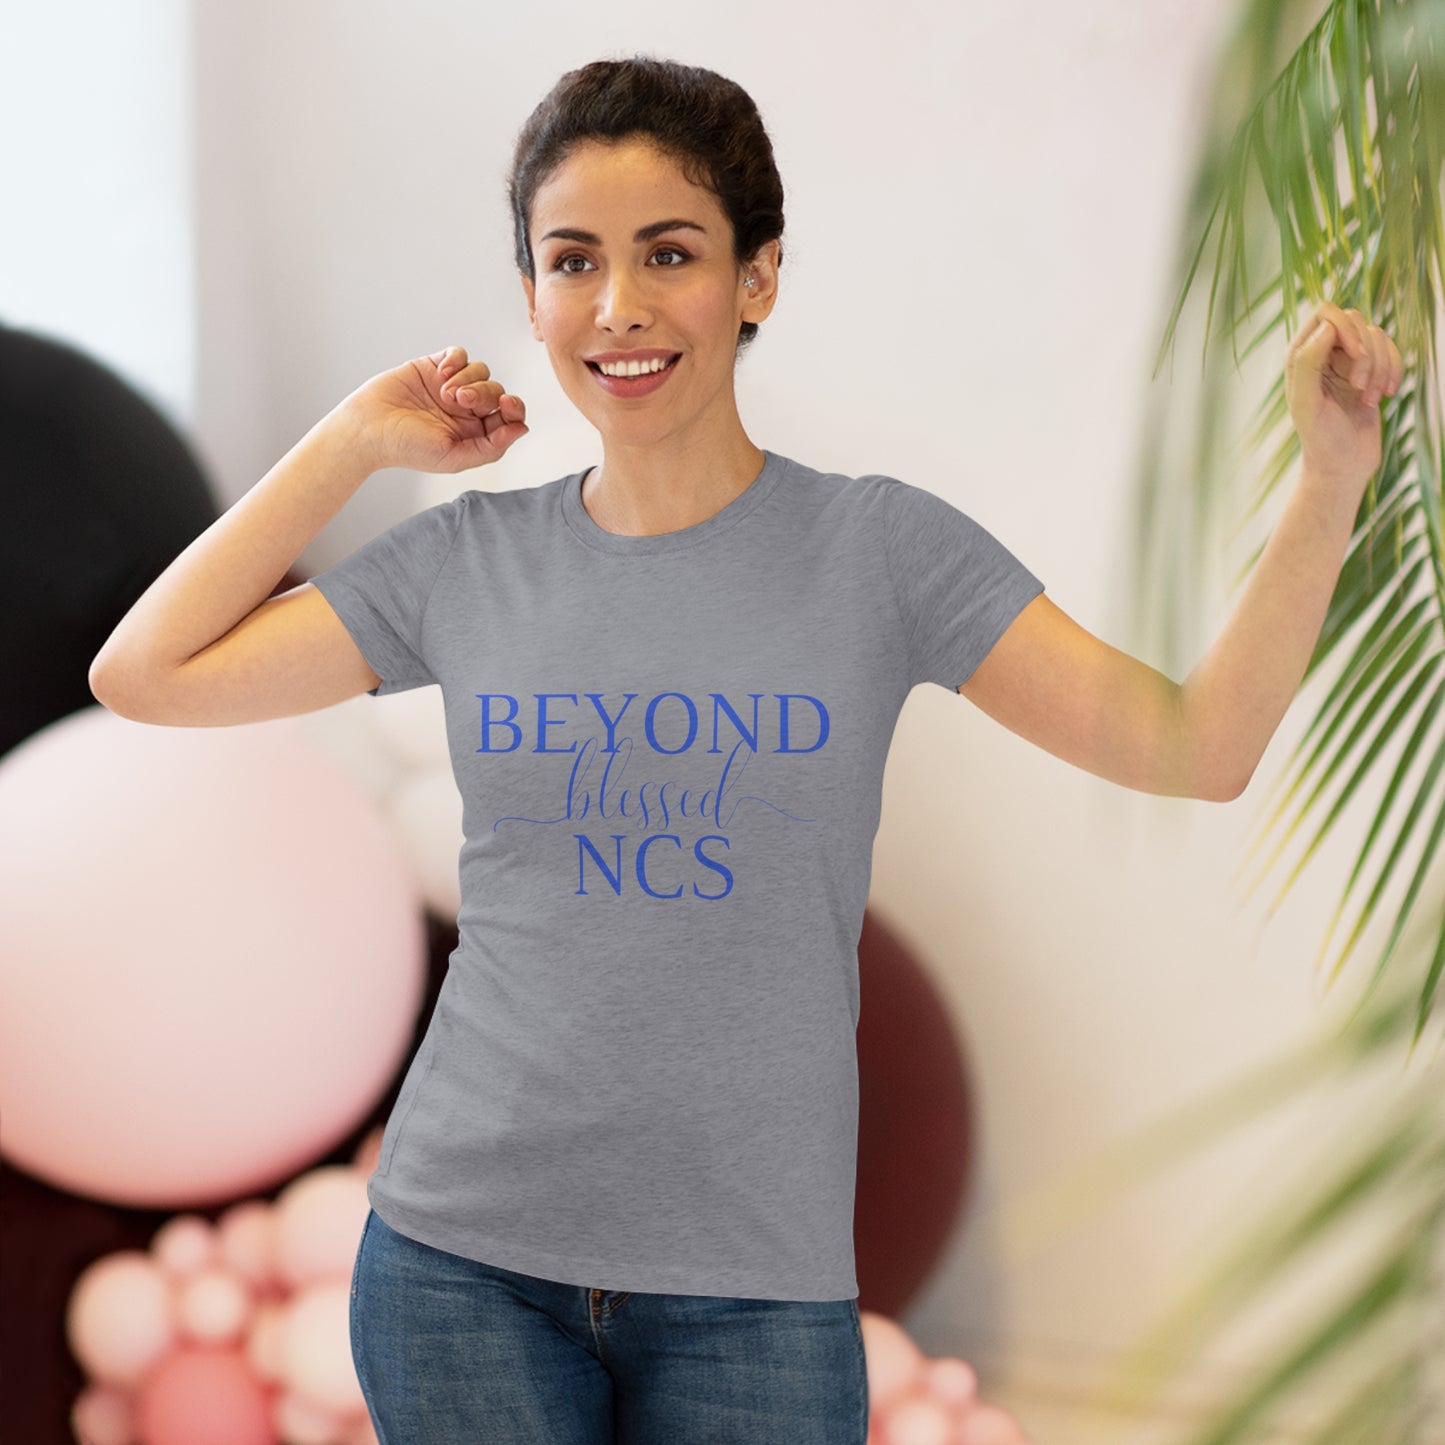 Beyond Blessed NCS - Women's Triblend Tee - Royal Blue